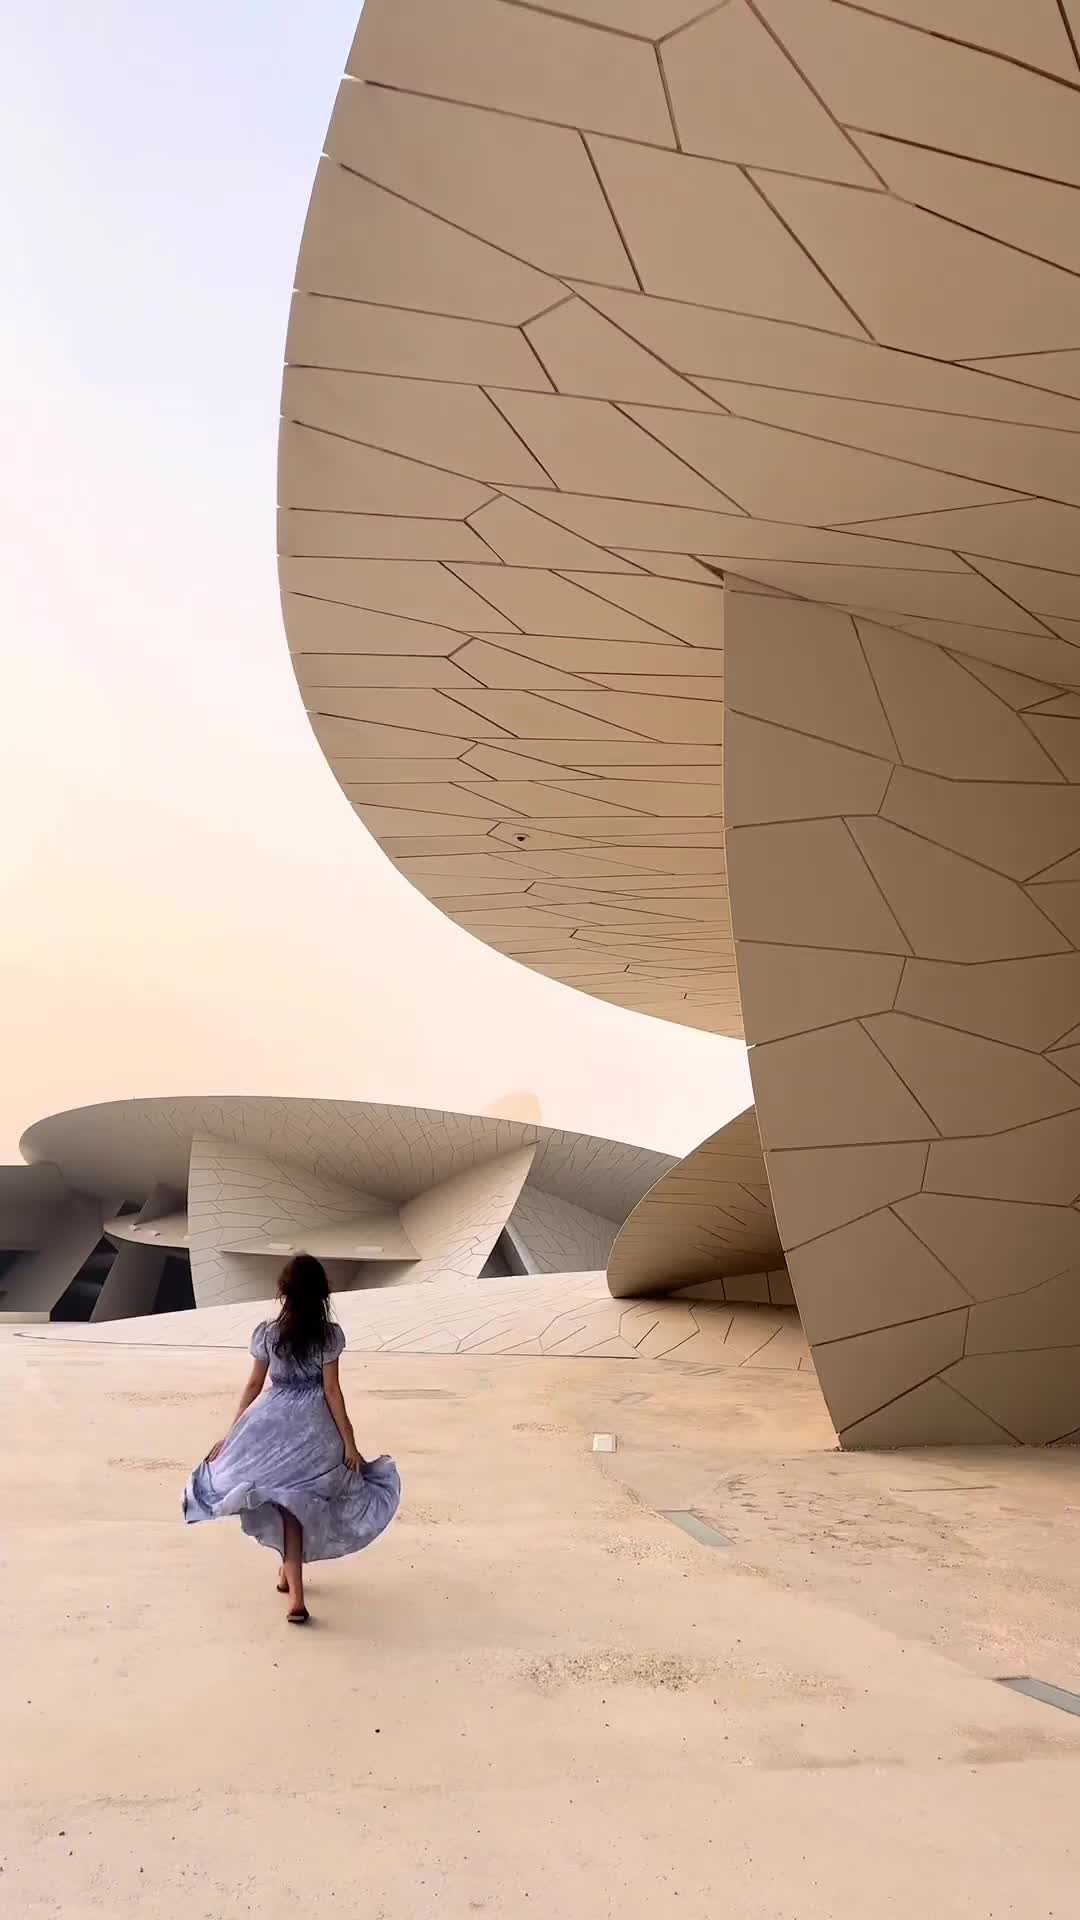 Explore the National Museum of Qatar in Doha